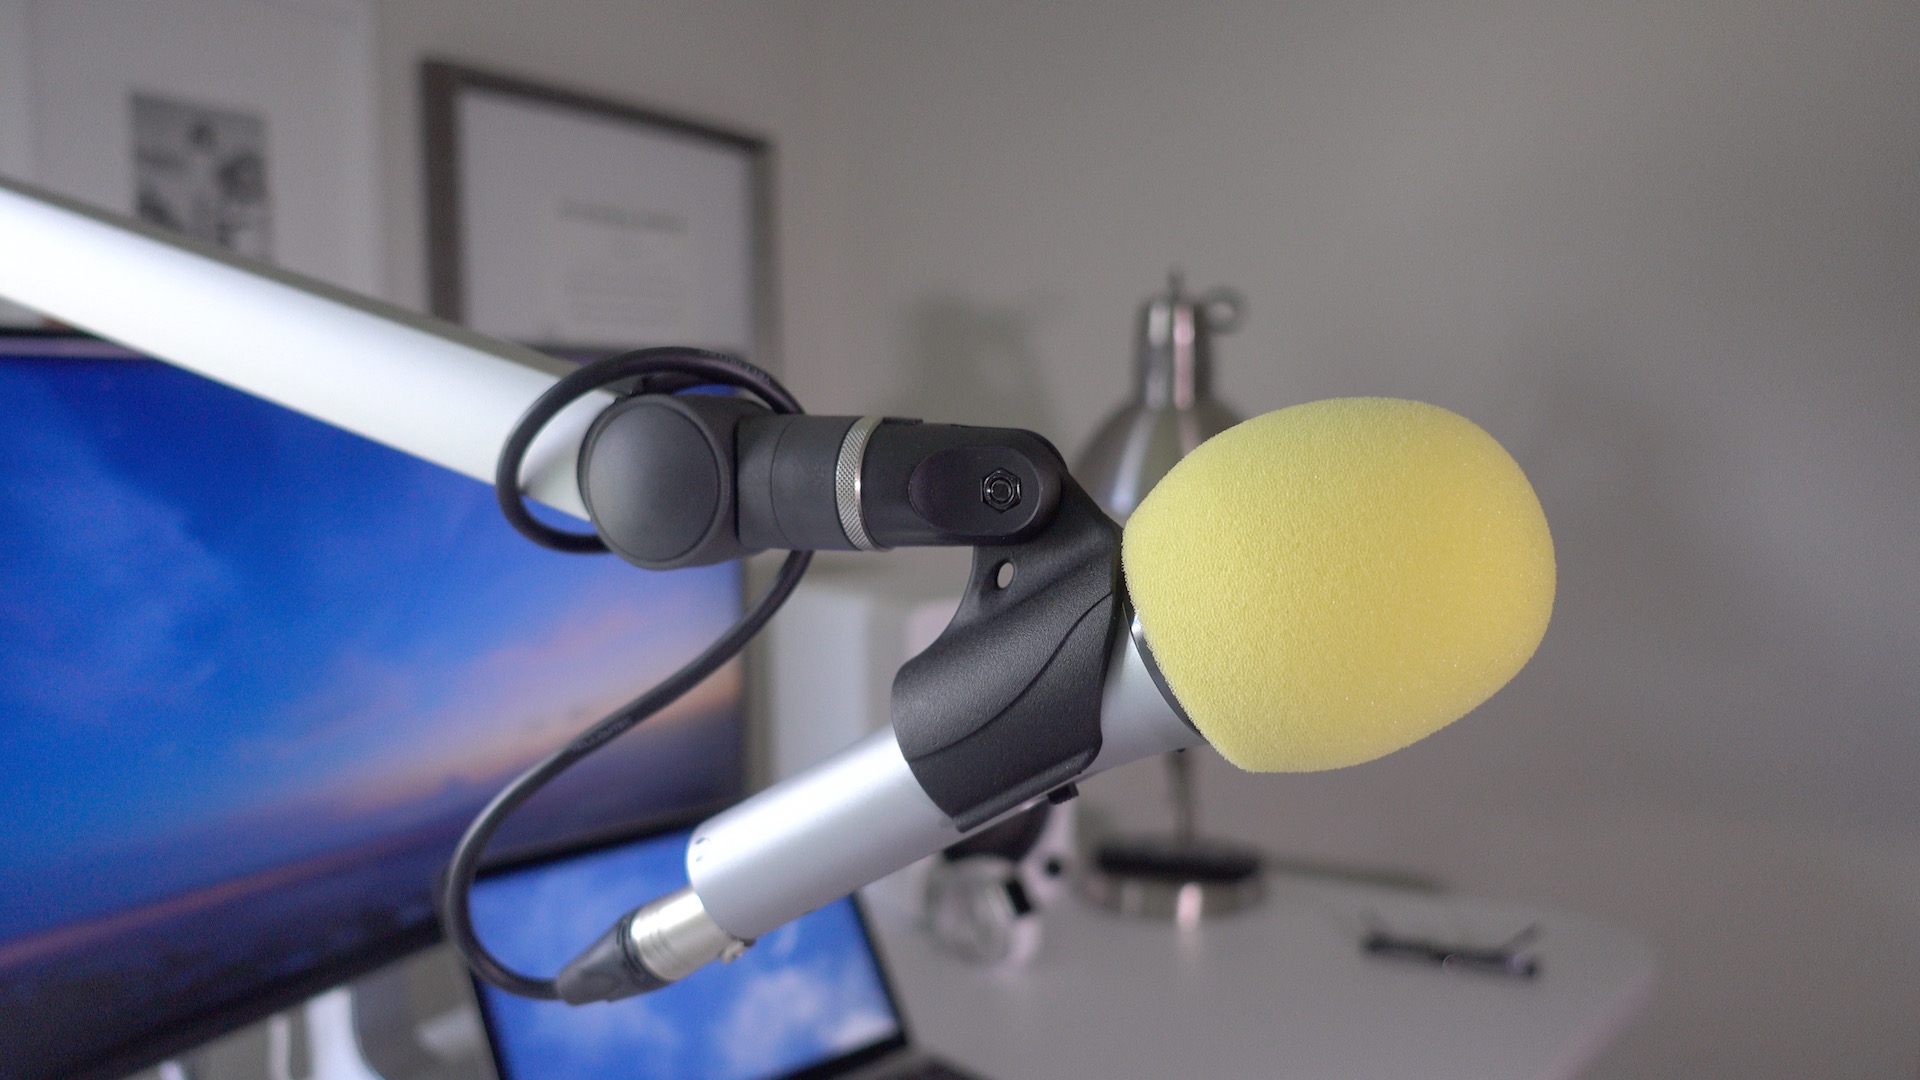 Podcast Voiceover Microphone Arm